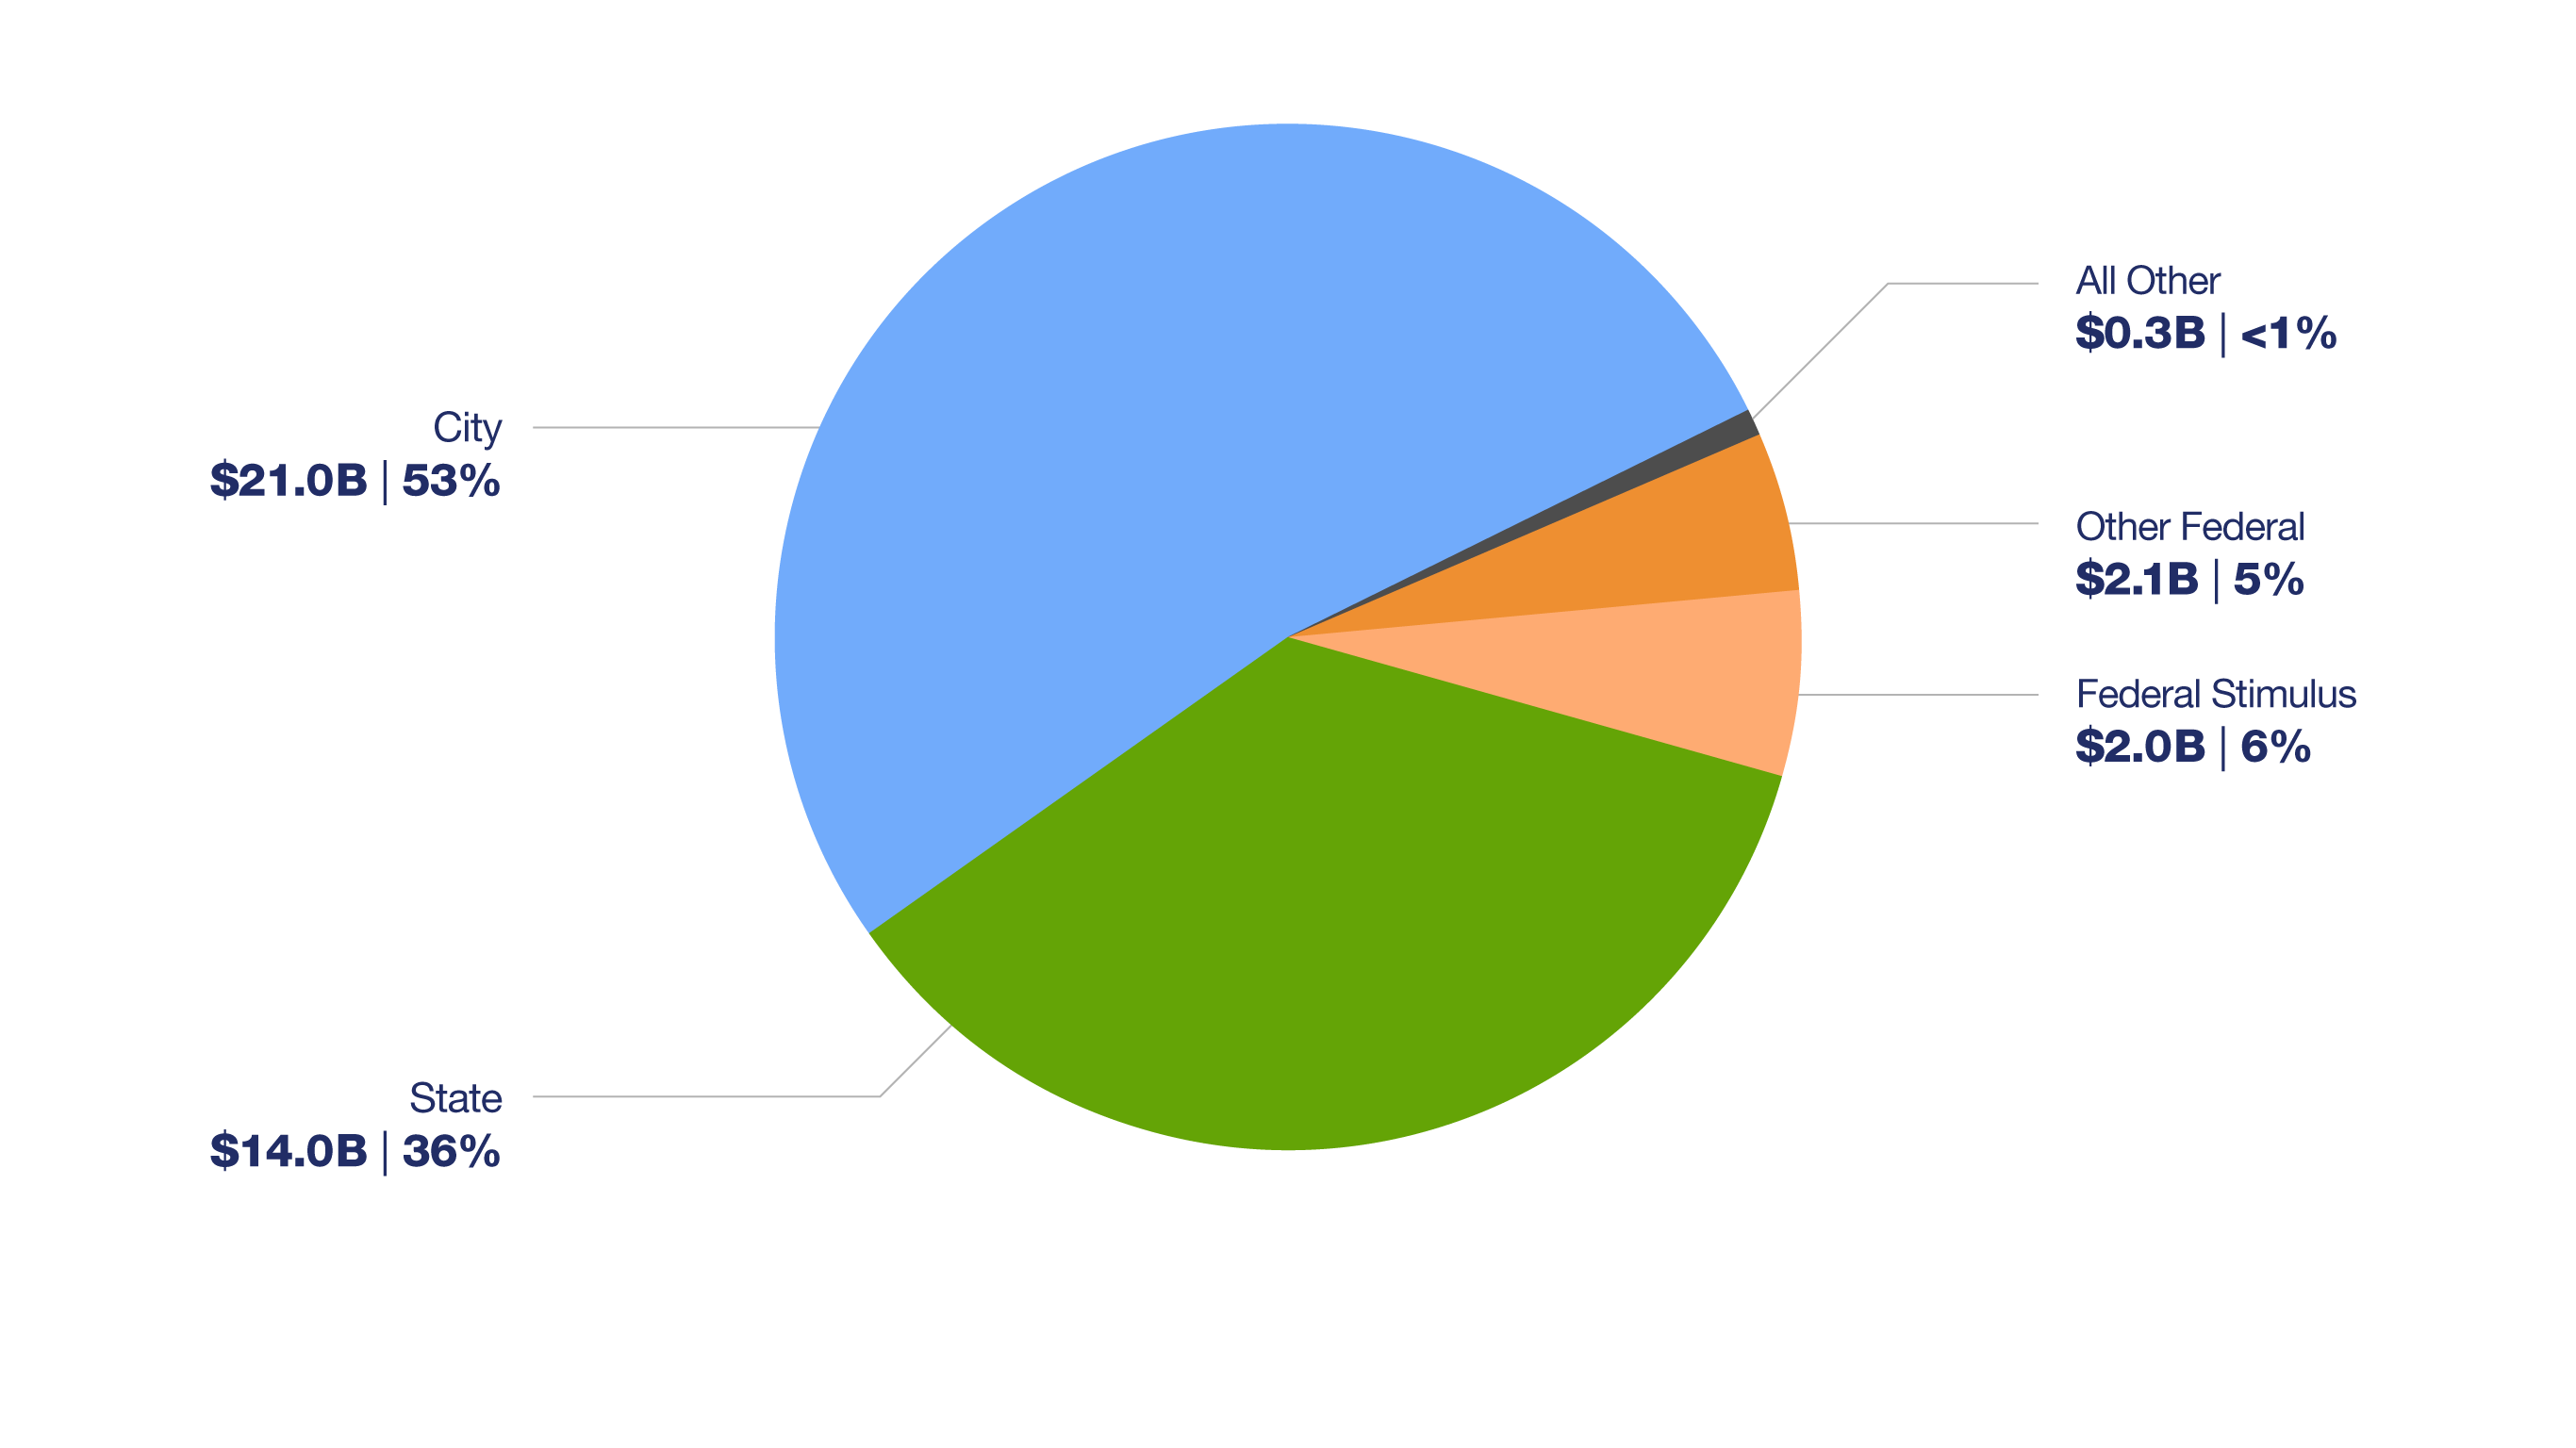 Decorative image of pie chart showing NYC public schools' funding sources.